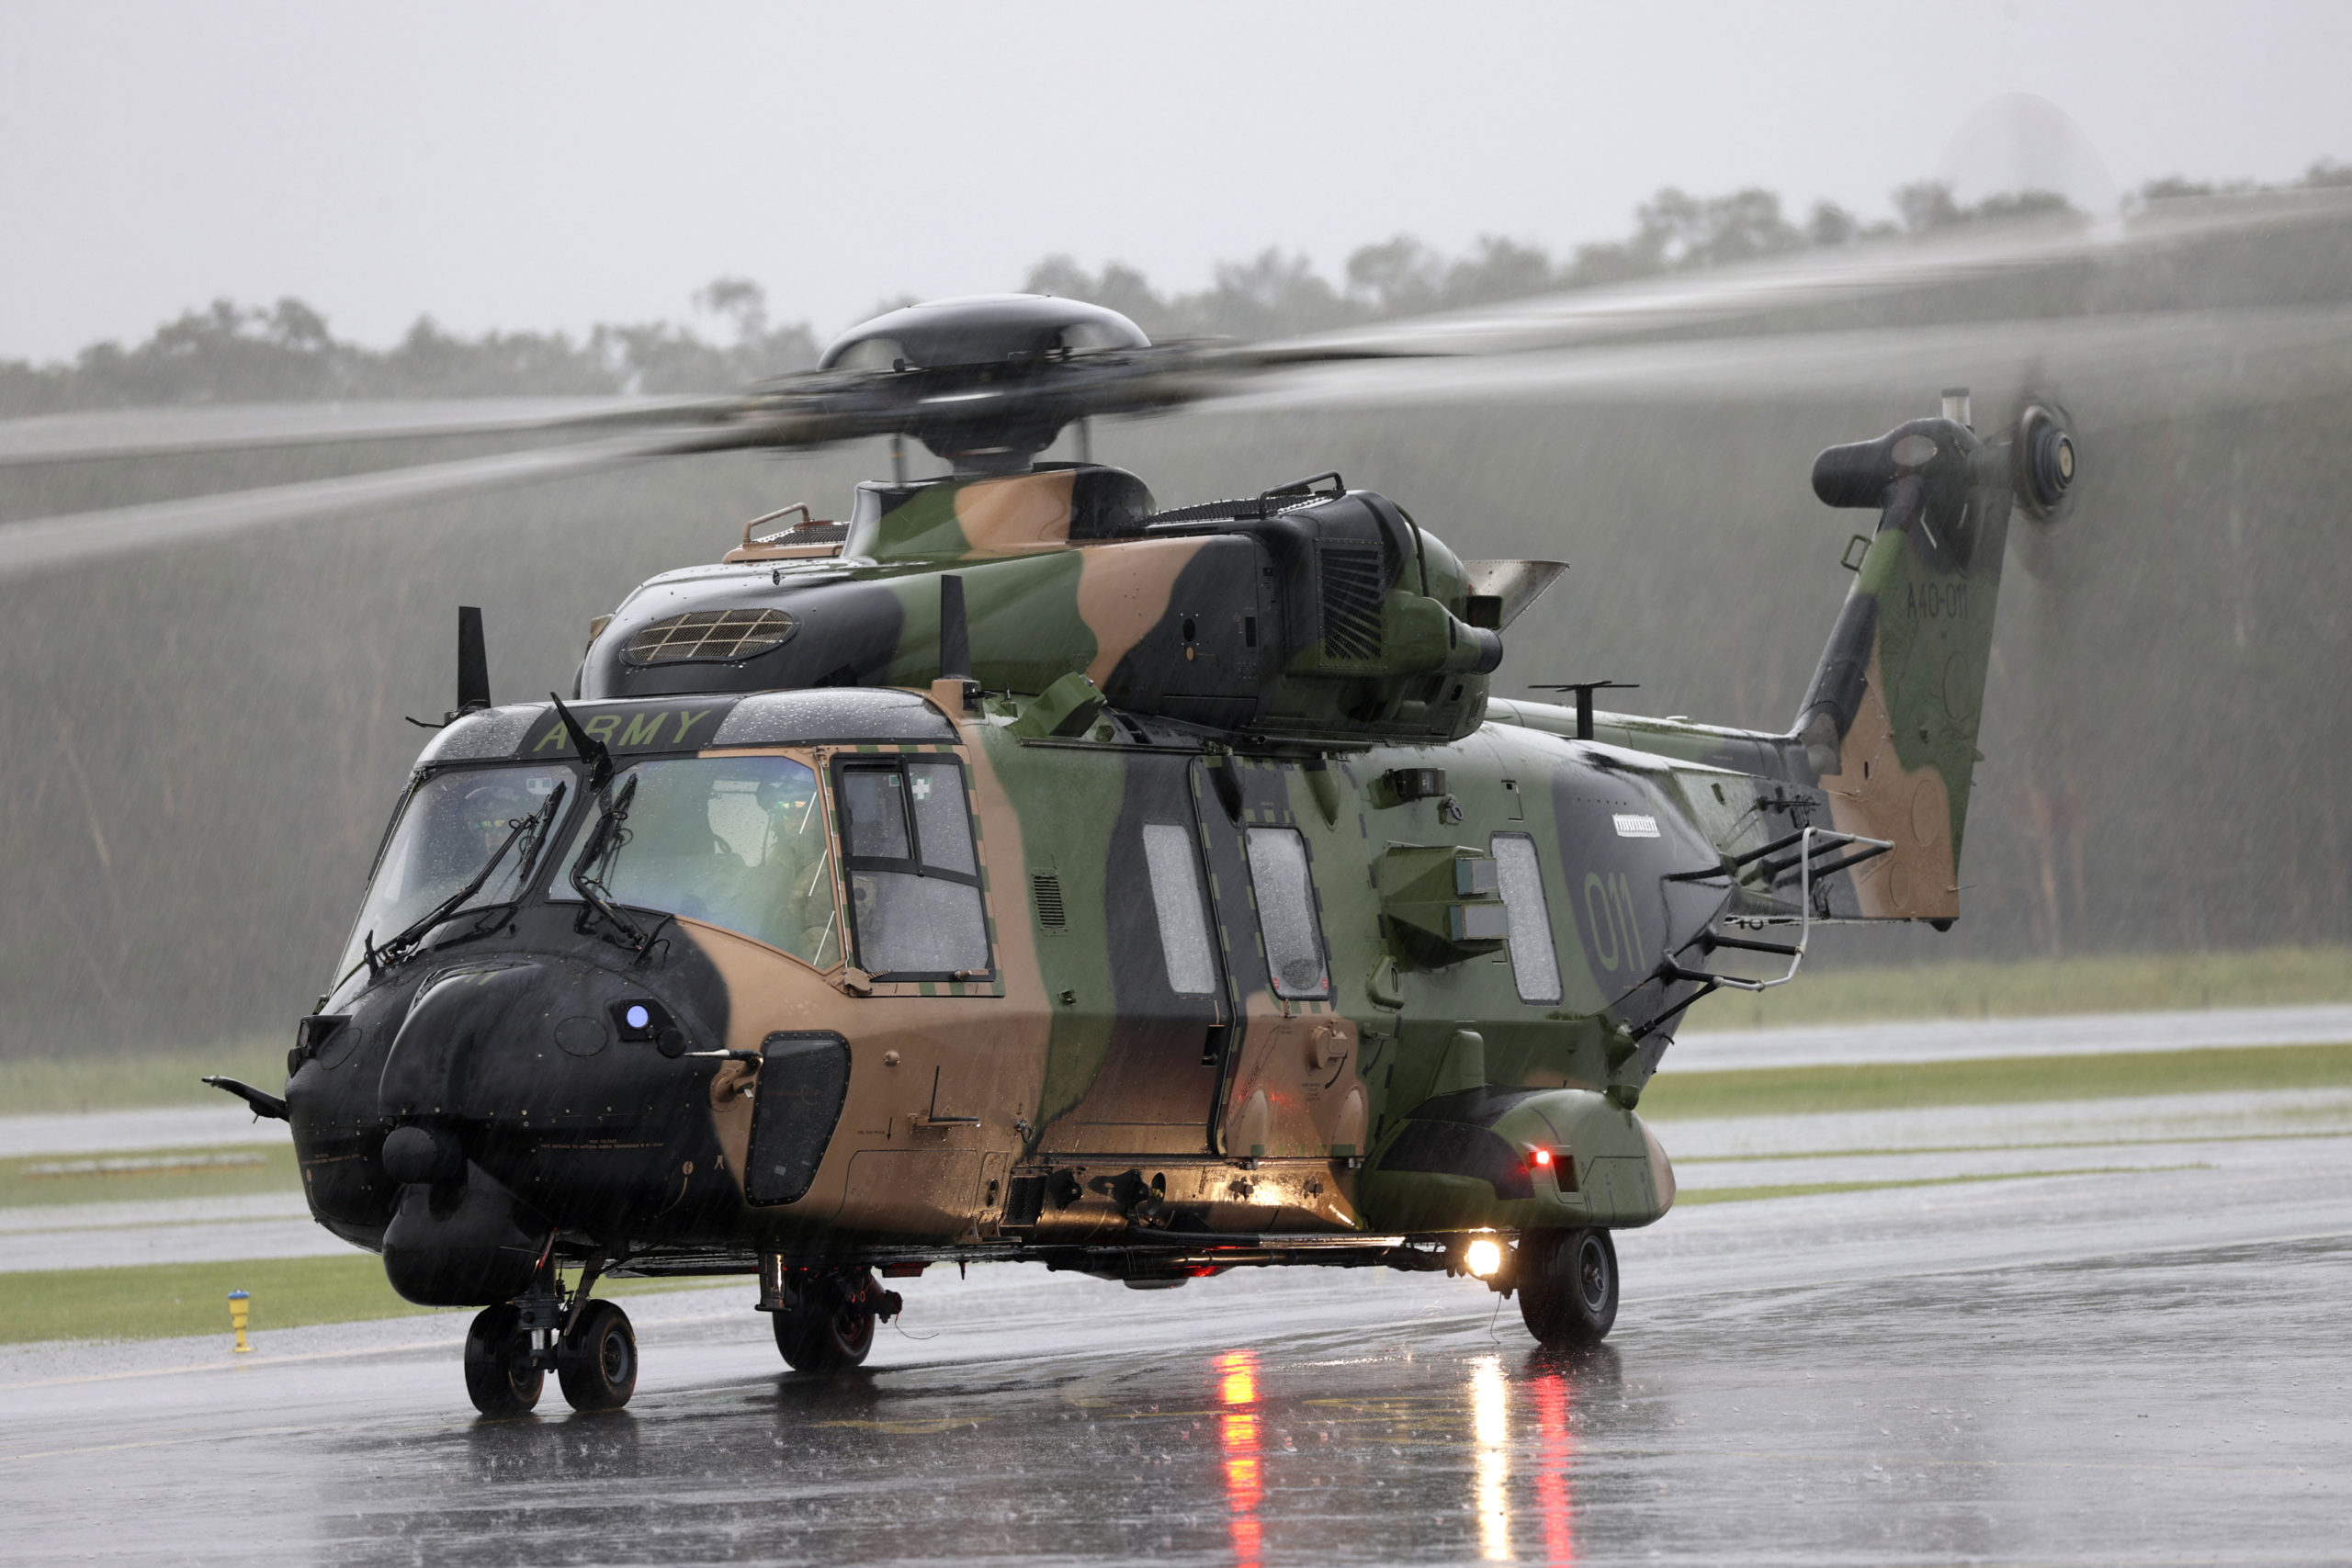 In this photo provided by the Australian Defence Force, an Australian Army MRH-90 Taipan helicopter prepares to take off from the airport in Ballina, Australia, on Feb. 27, 2022.